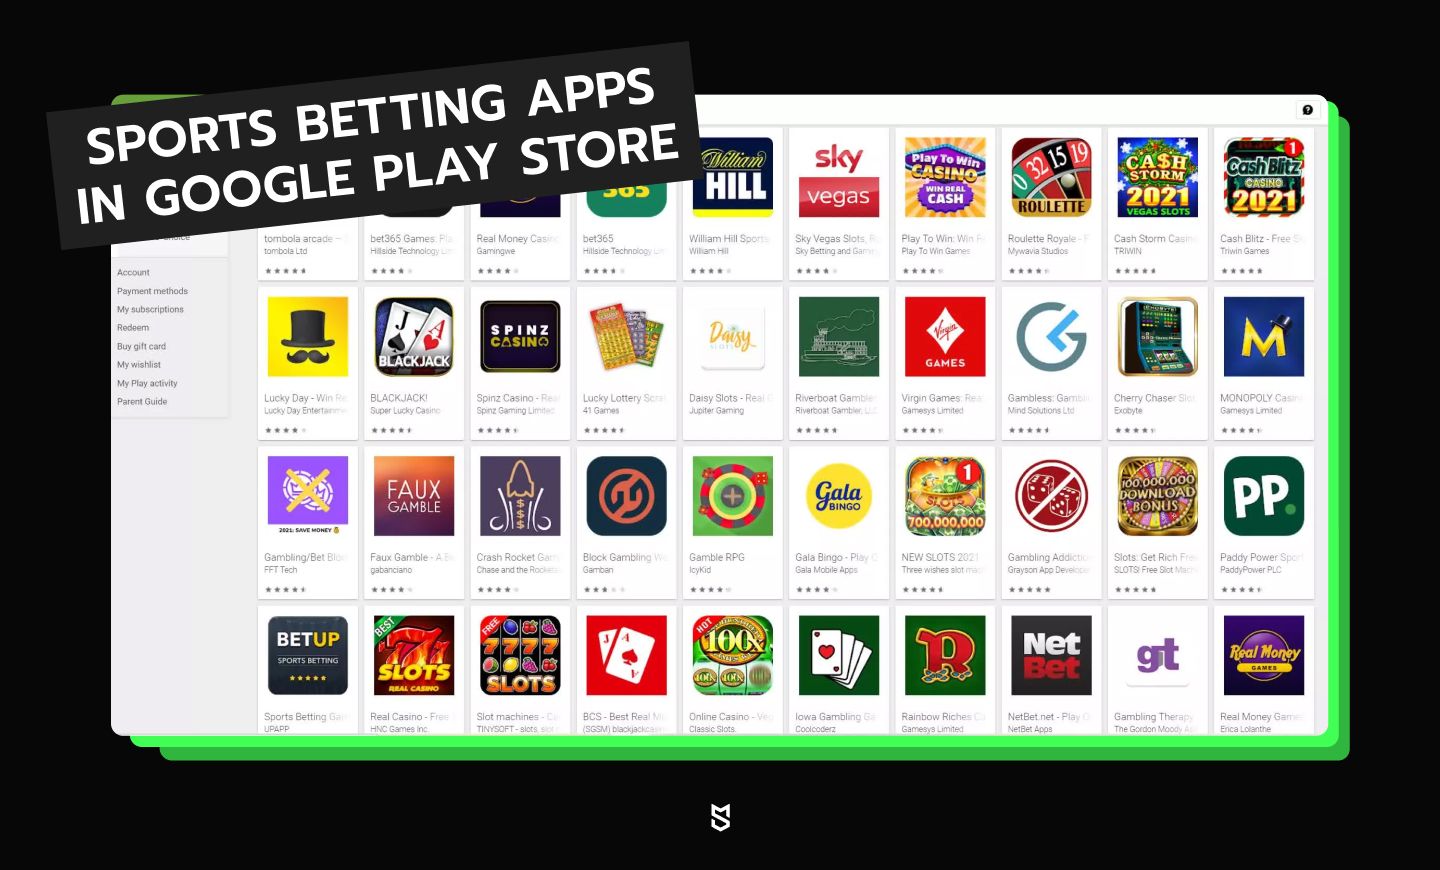 59% Of The Market Is Interested In Betting App For Cricket